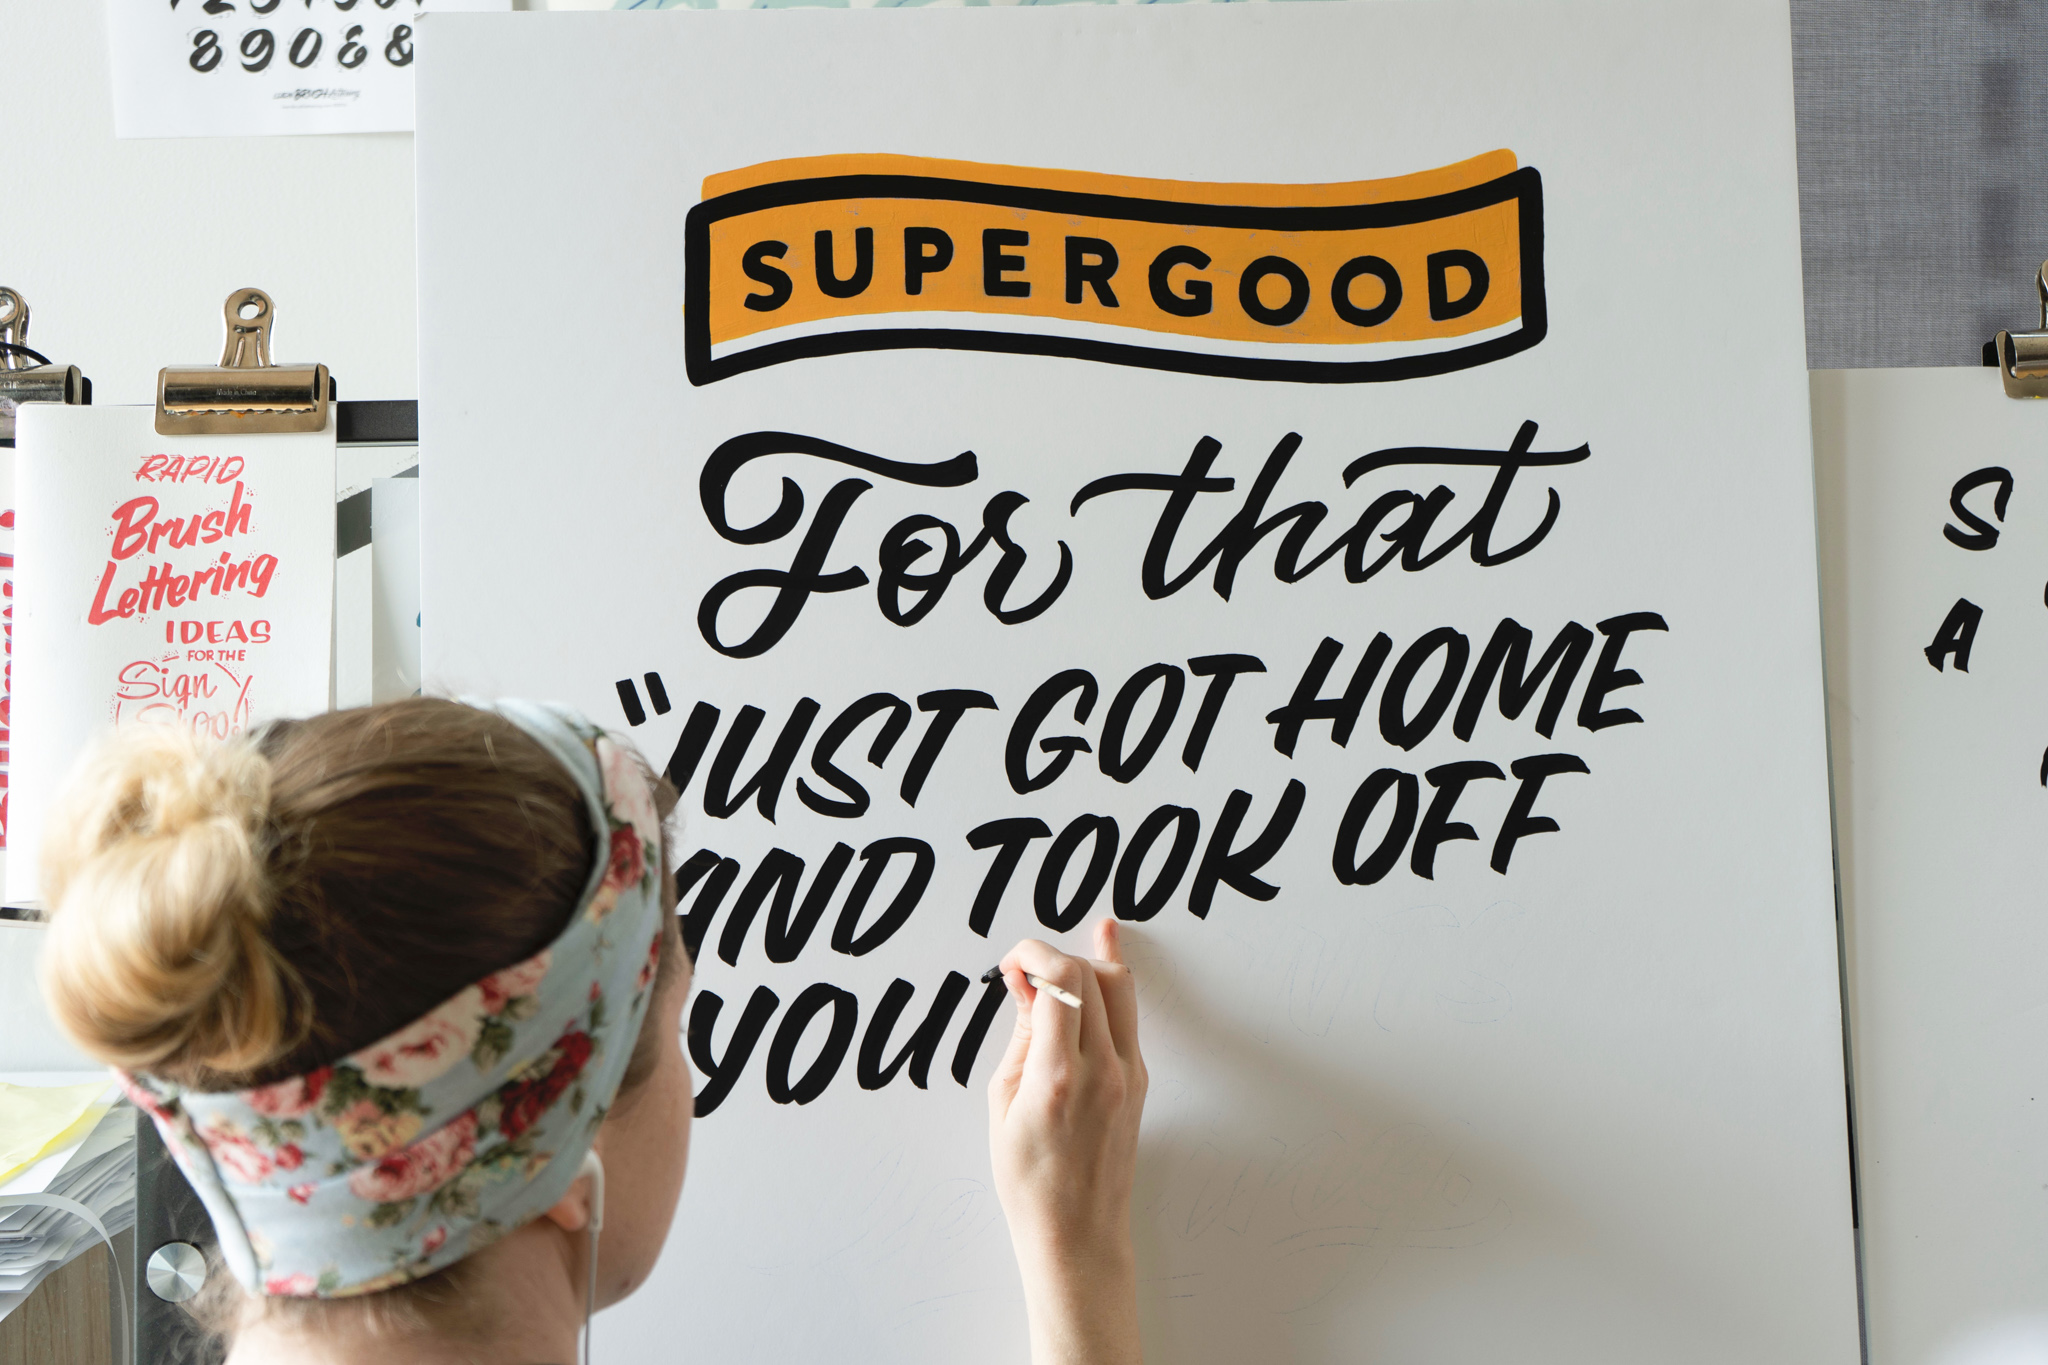 Hand painted sign for Supergood hemp custom painted by Hillery Powers